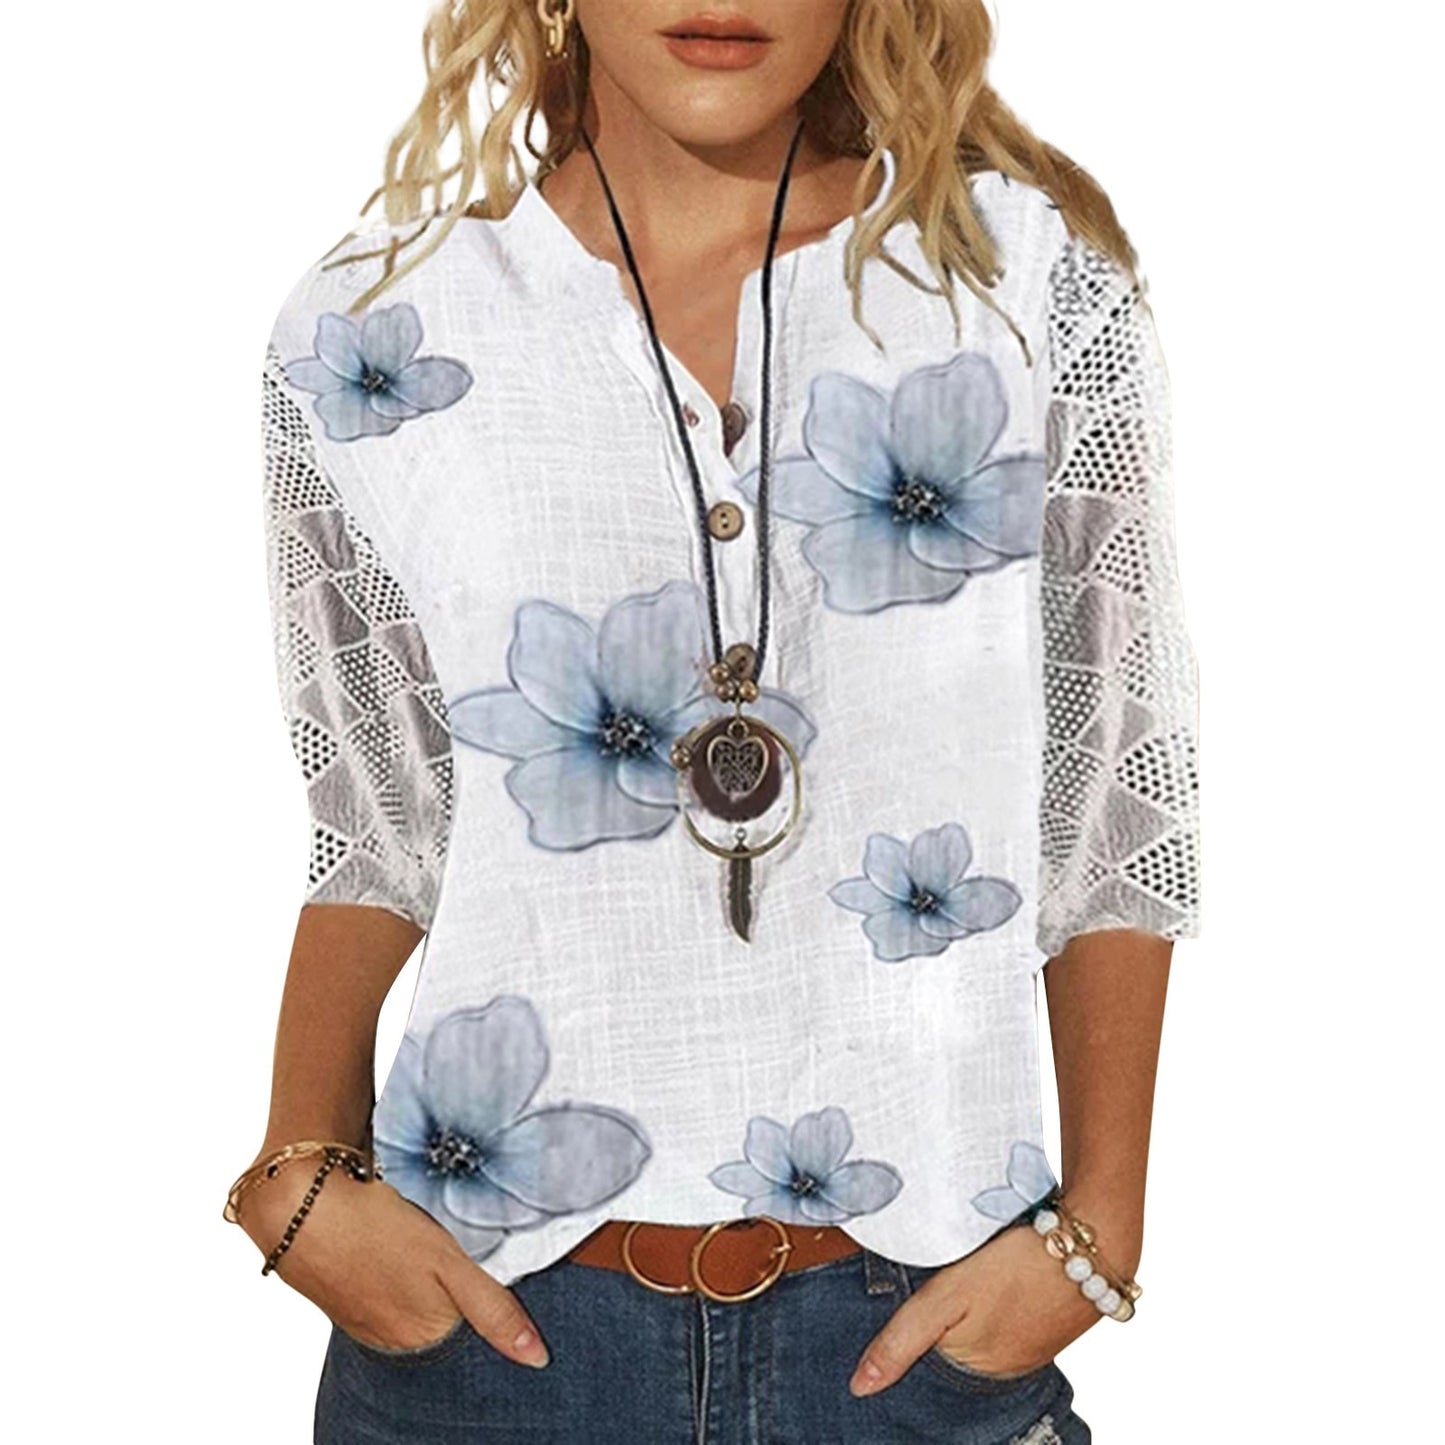 Women's Casual Print Lace Tee Shirt with V Neck and 3/4 Sleeve